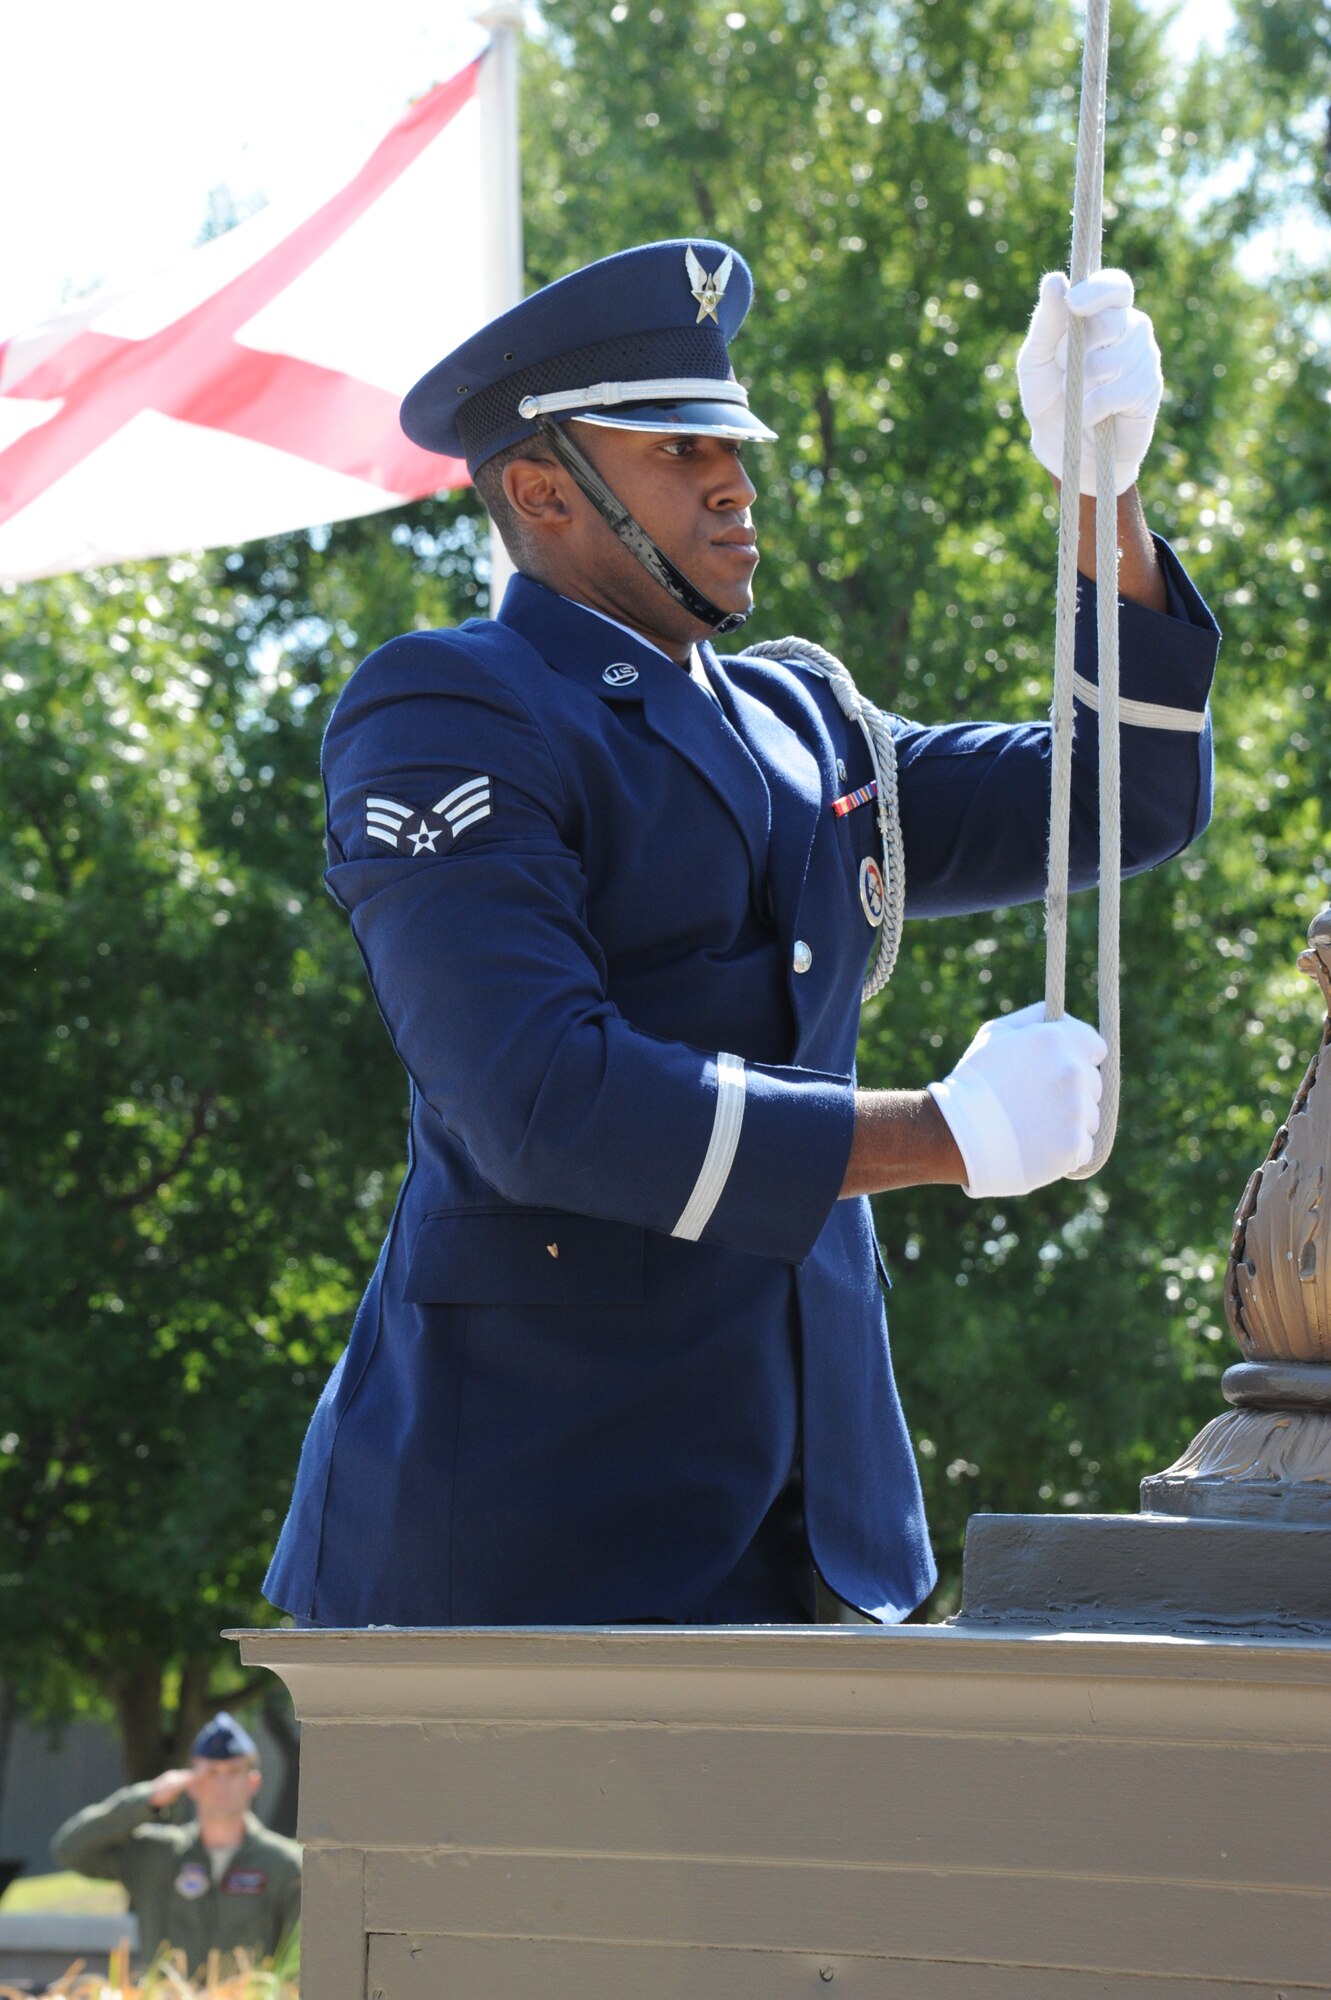 LAUGHLIN AIR FORCE BASE, Texas – Senior Airman Reggie Randolph, 47th Medical Operations Squadron, raises the U.S. flag during Laughlin’s 9/11 Remembrance Ceremony at Heritage Park here Sept. 11 as a flight of Laughlin Airmen salute. Dozens of Laughlin members and Del Rio citizens turned out to honor those who perished 10 years ago on Sept. 11, 2001. (U.S.  Air Force photo/Airman 1st Class Blake Mize) 